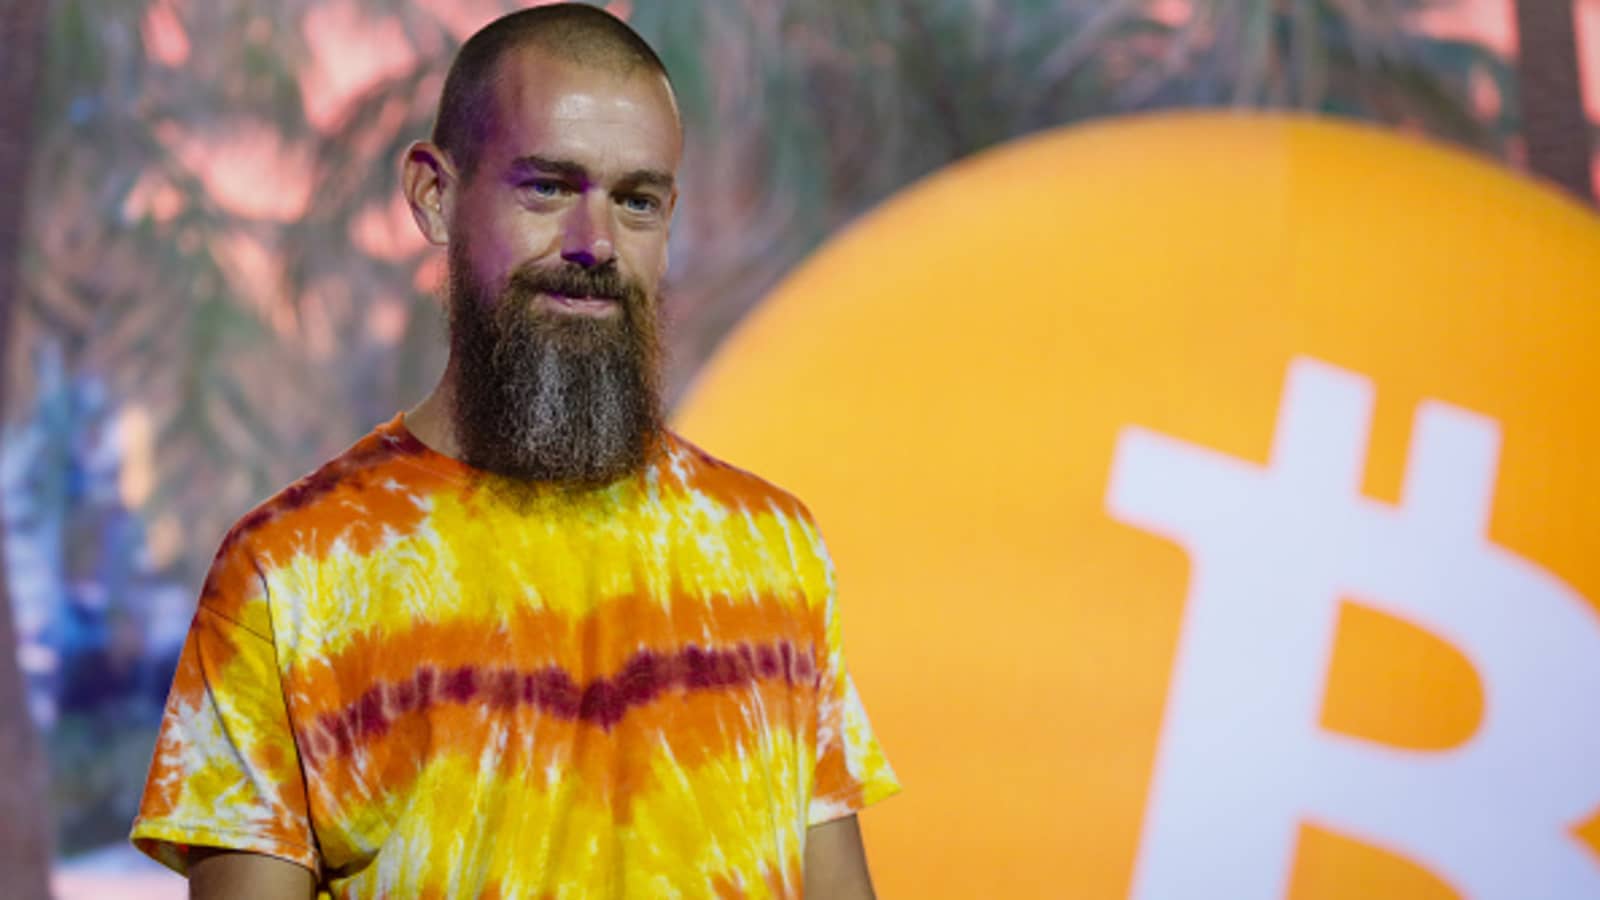 Jack Dorsey's Twitter departure means more time for bitcoin passion